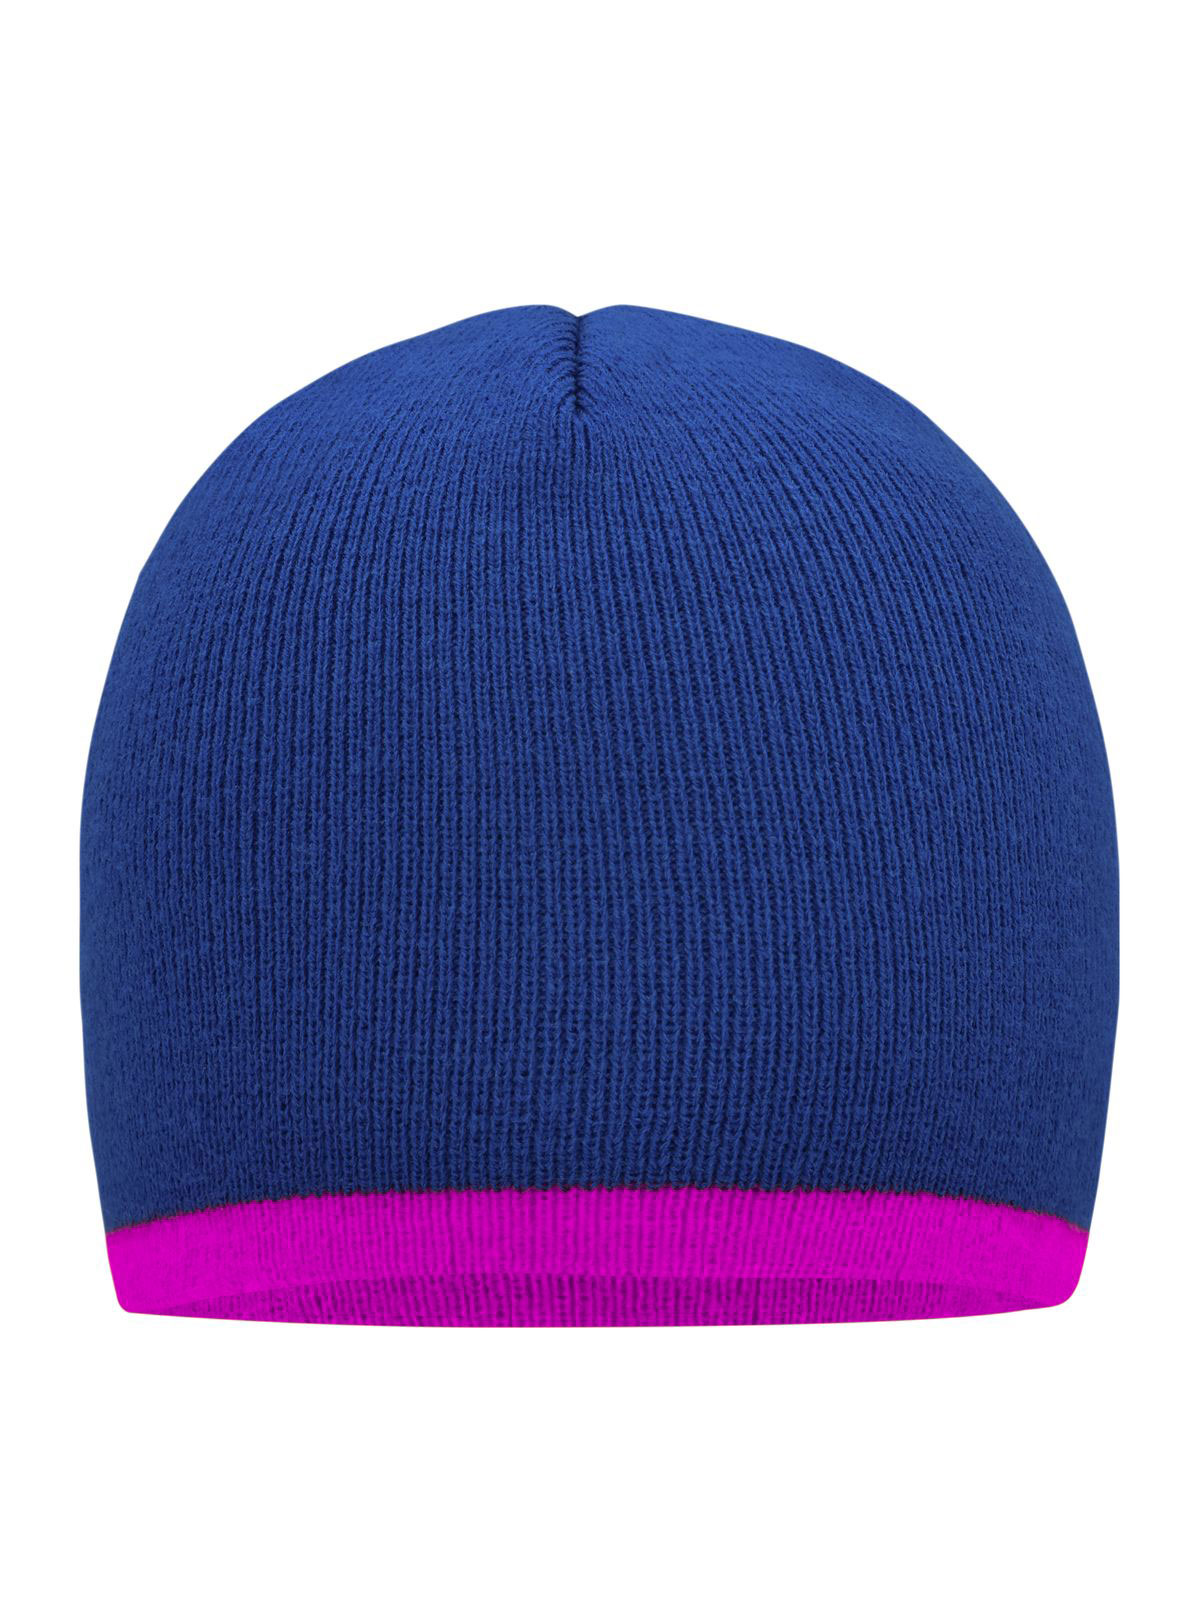 beanie-with-contrasting-border-royal-pink.webp